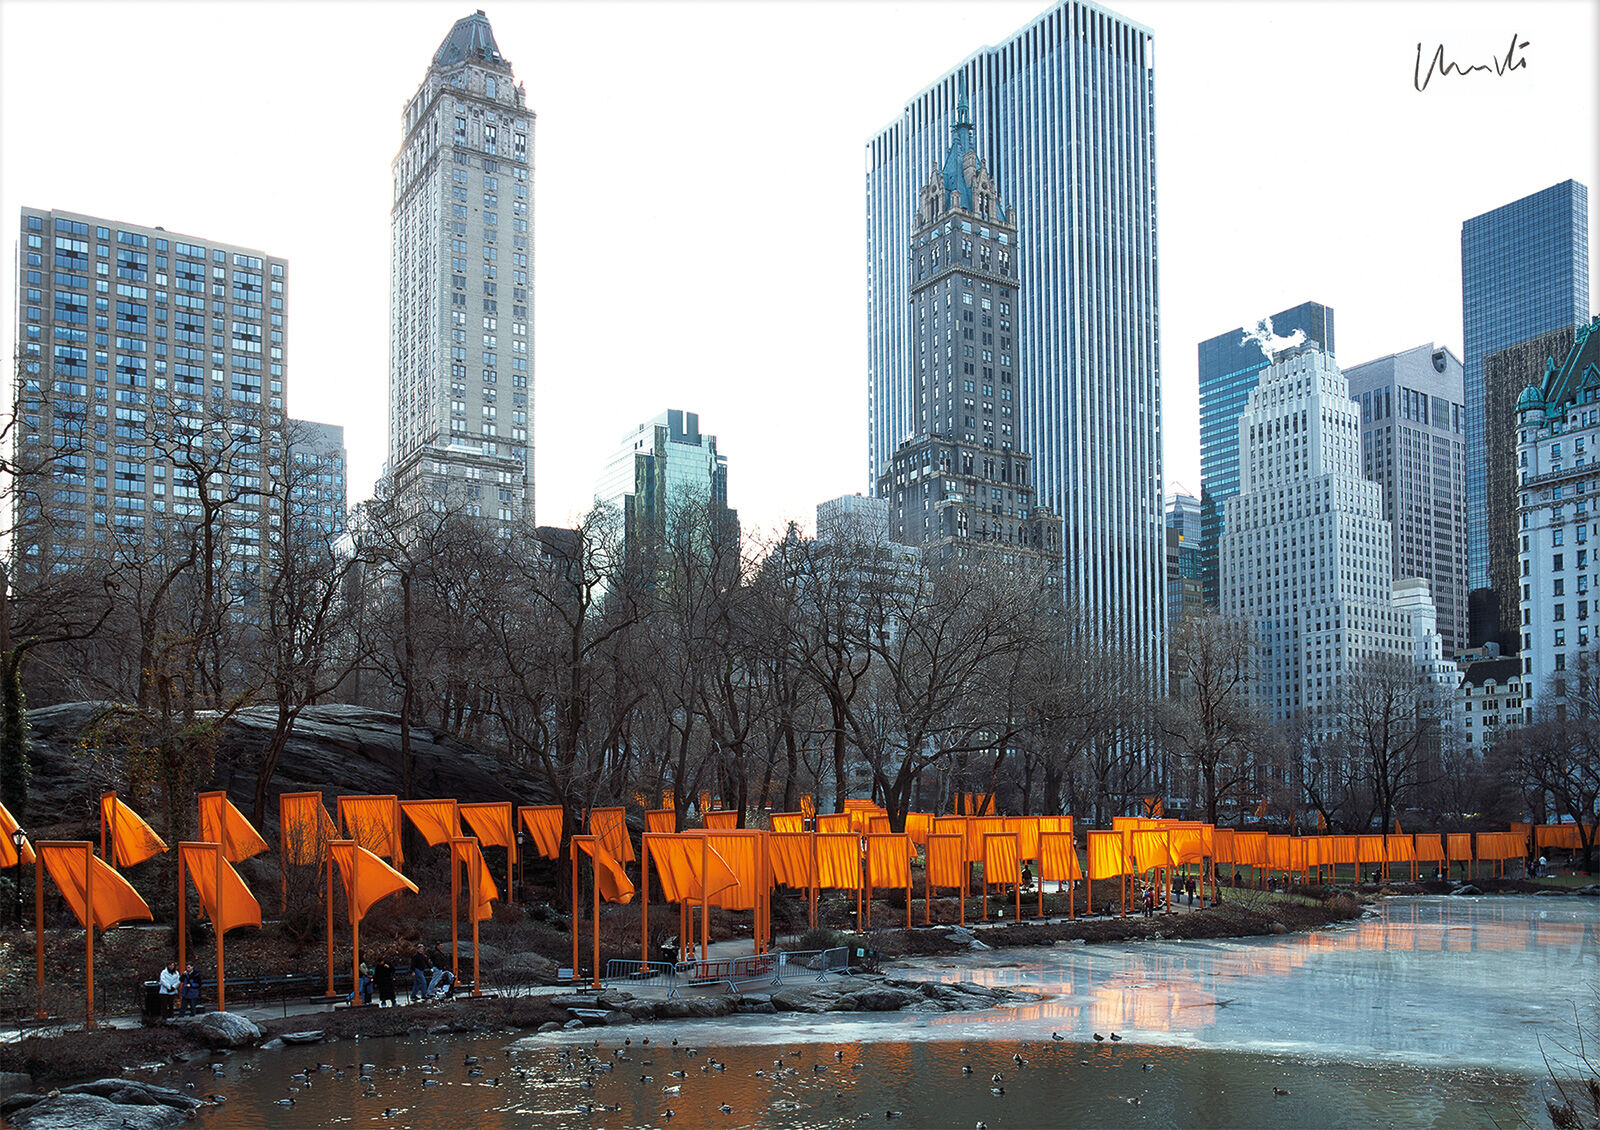 Picture "The Gates Photo 50", unframed by Christo und Jeanne-Claude